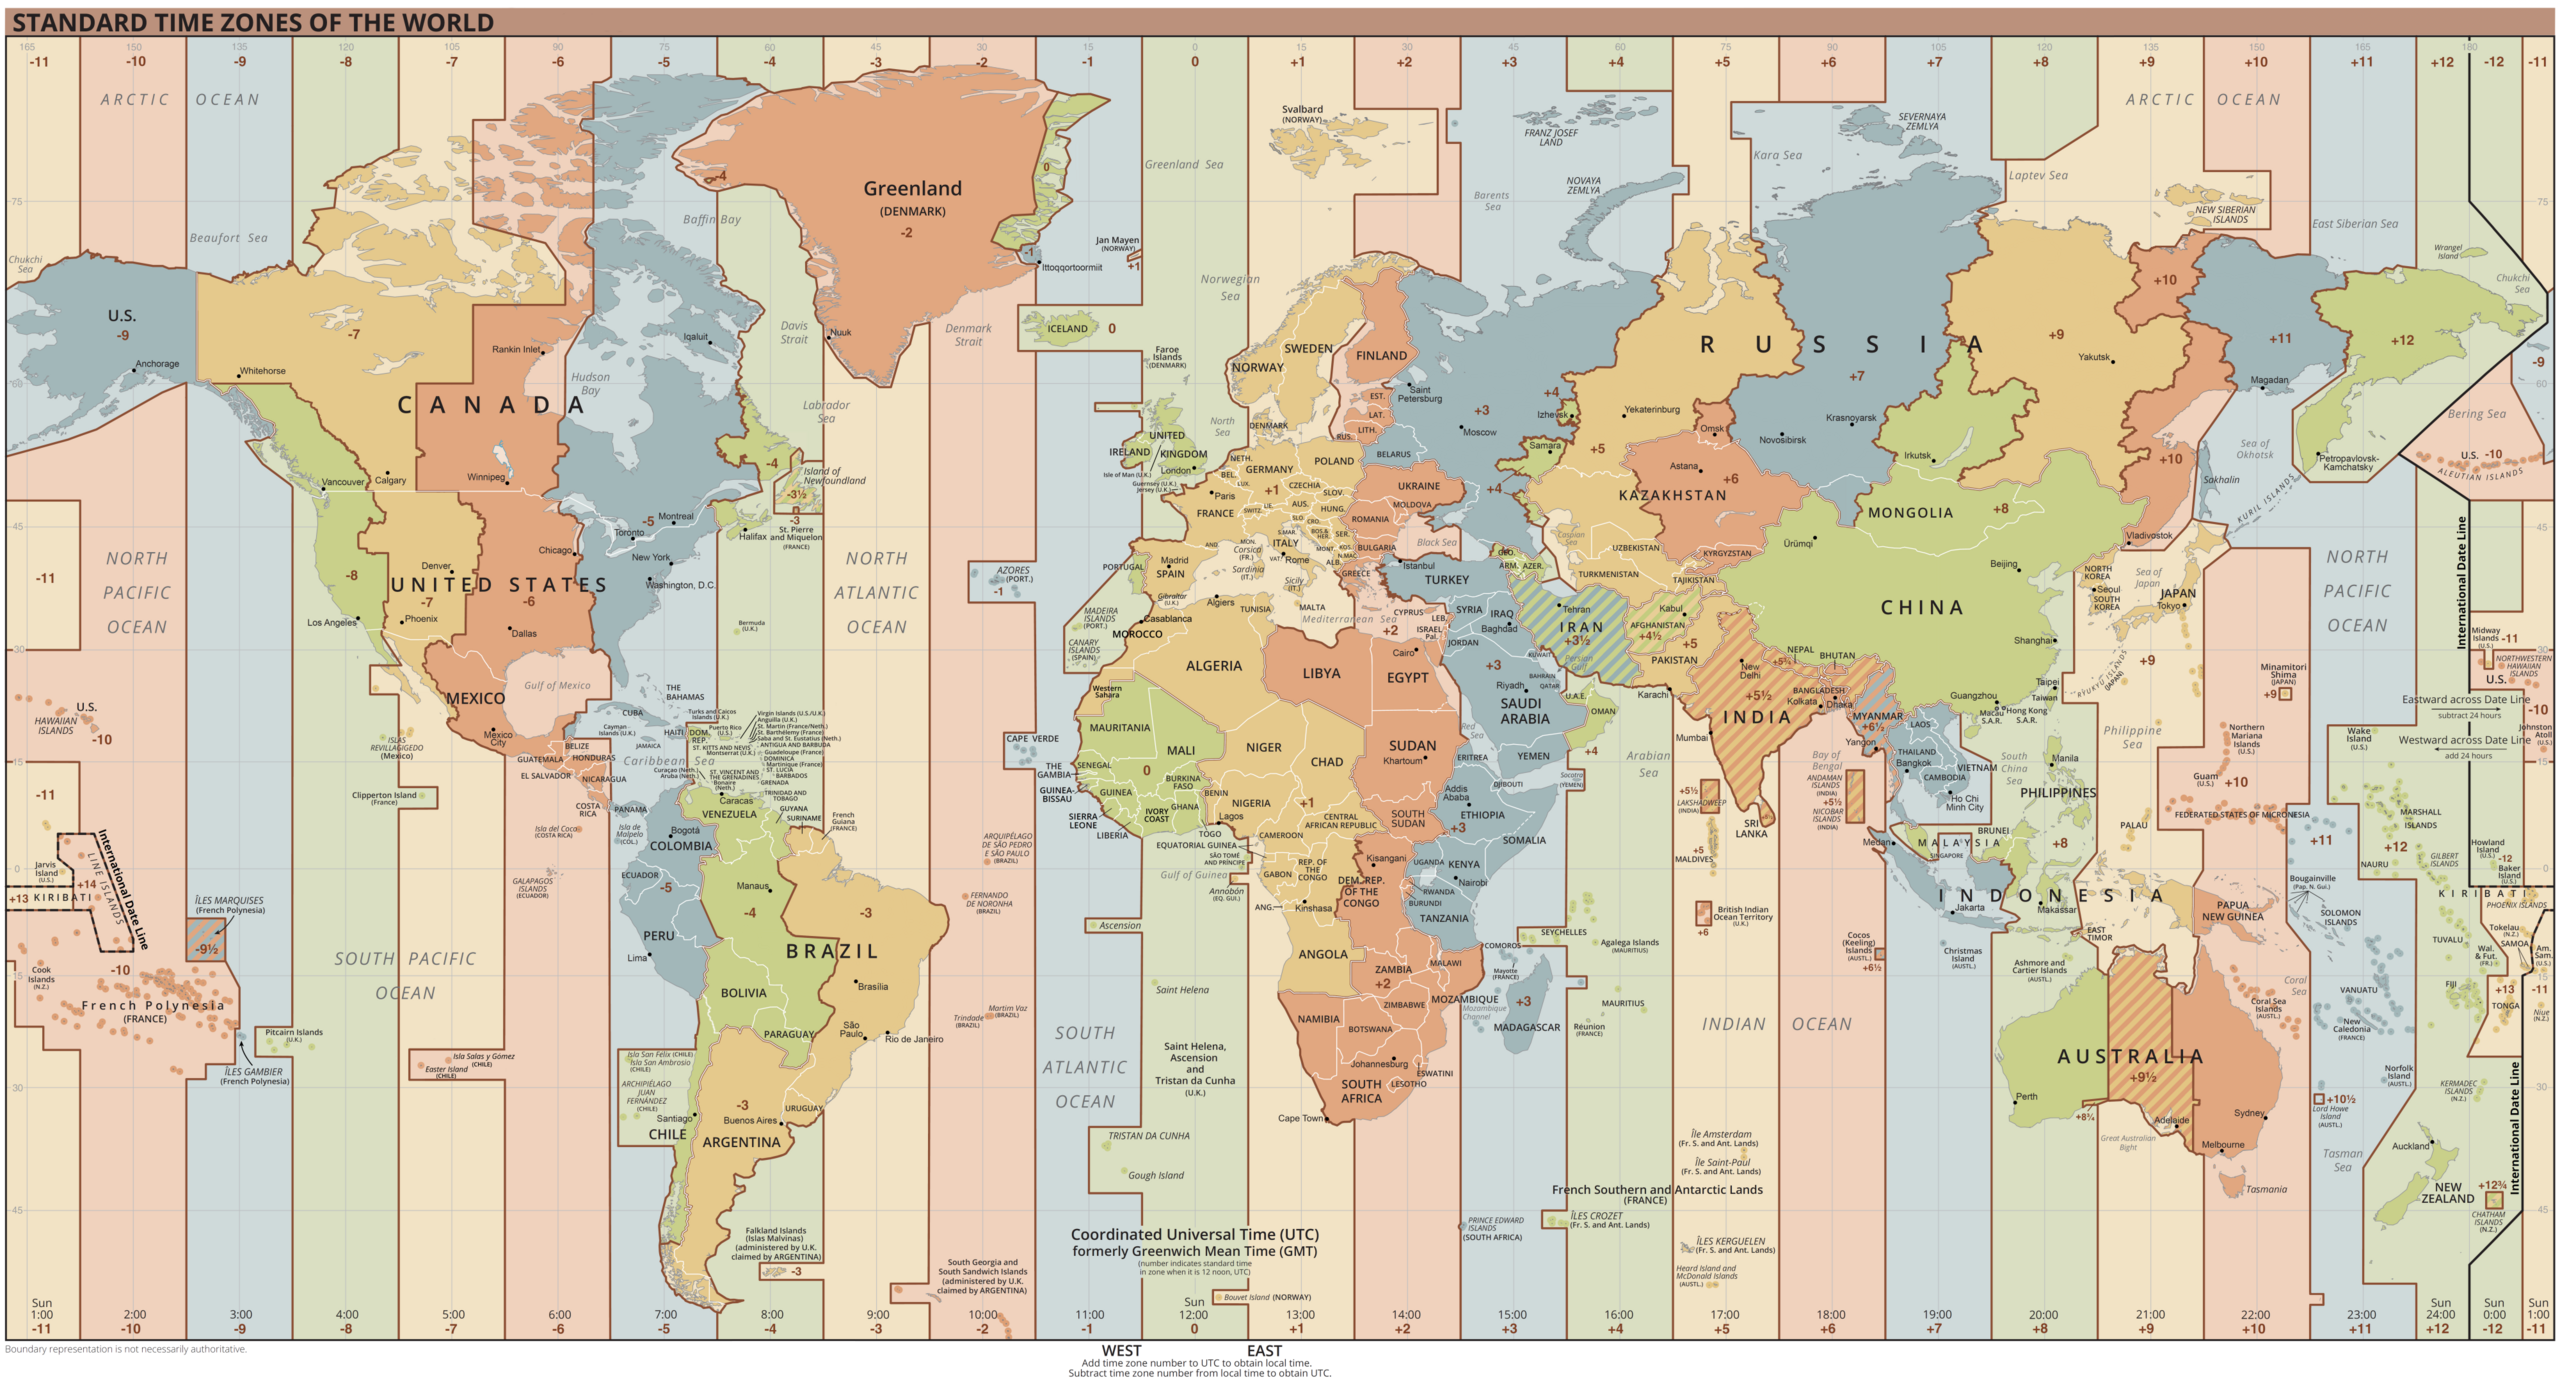 World map with different time zones